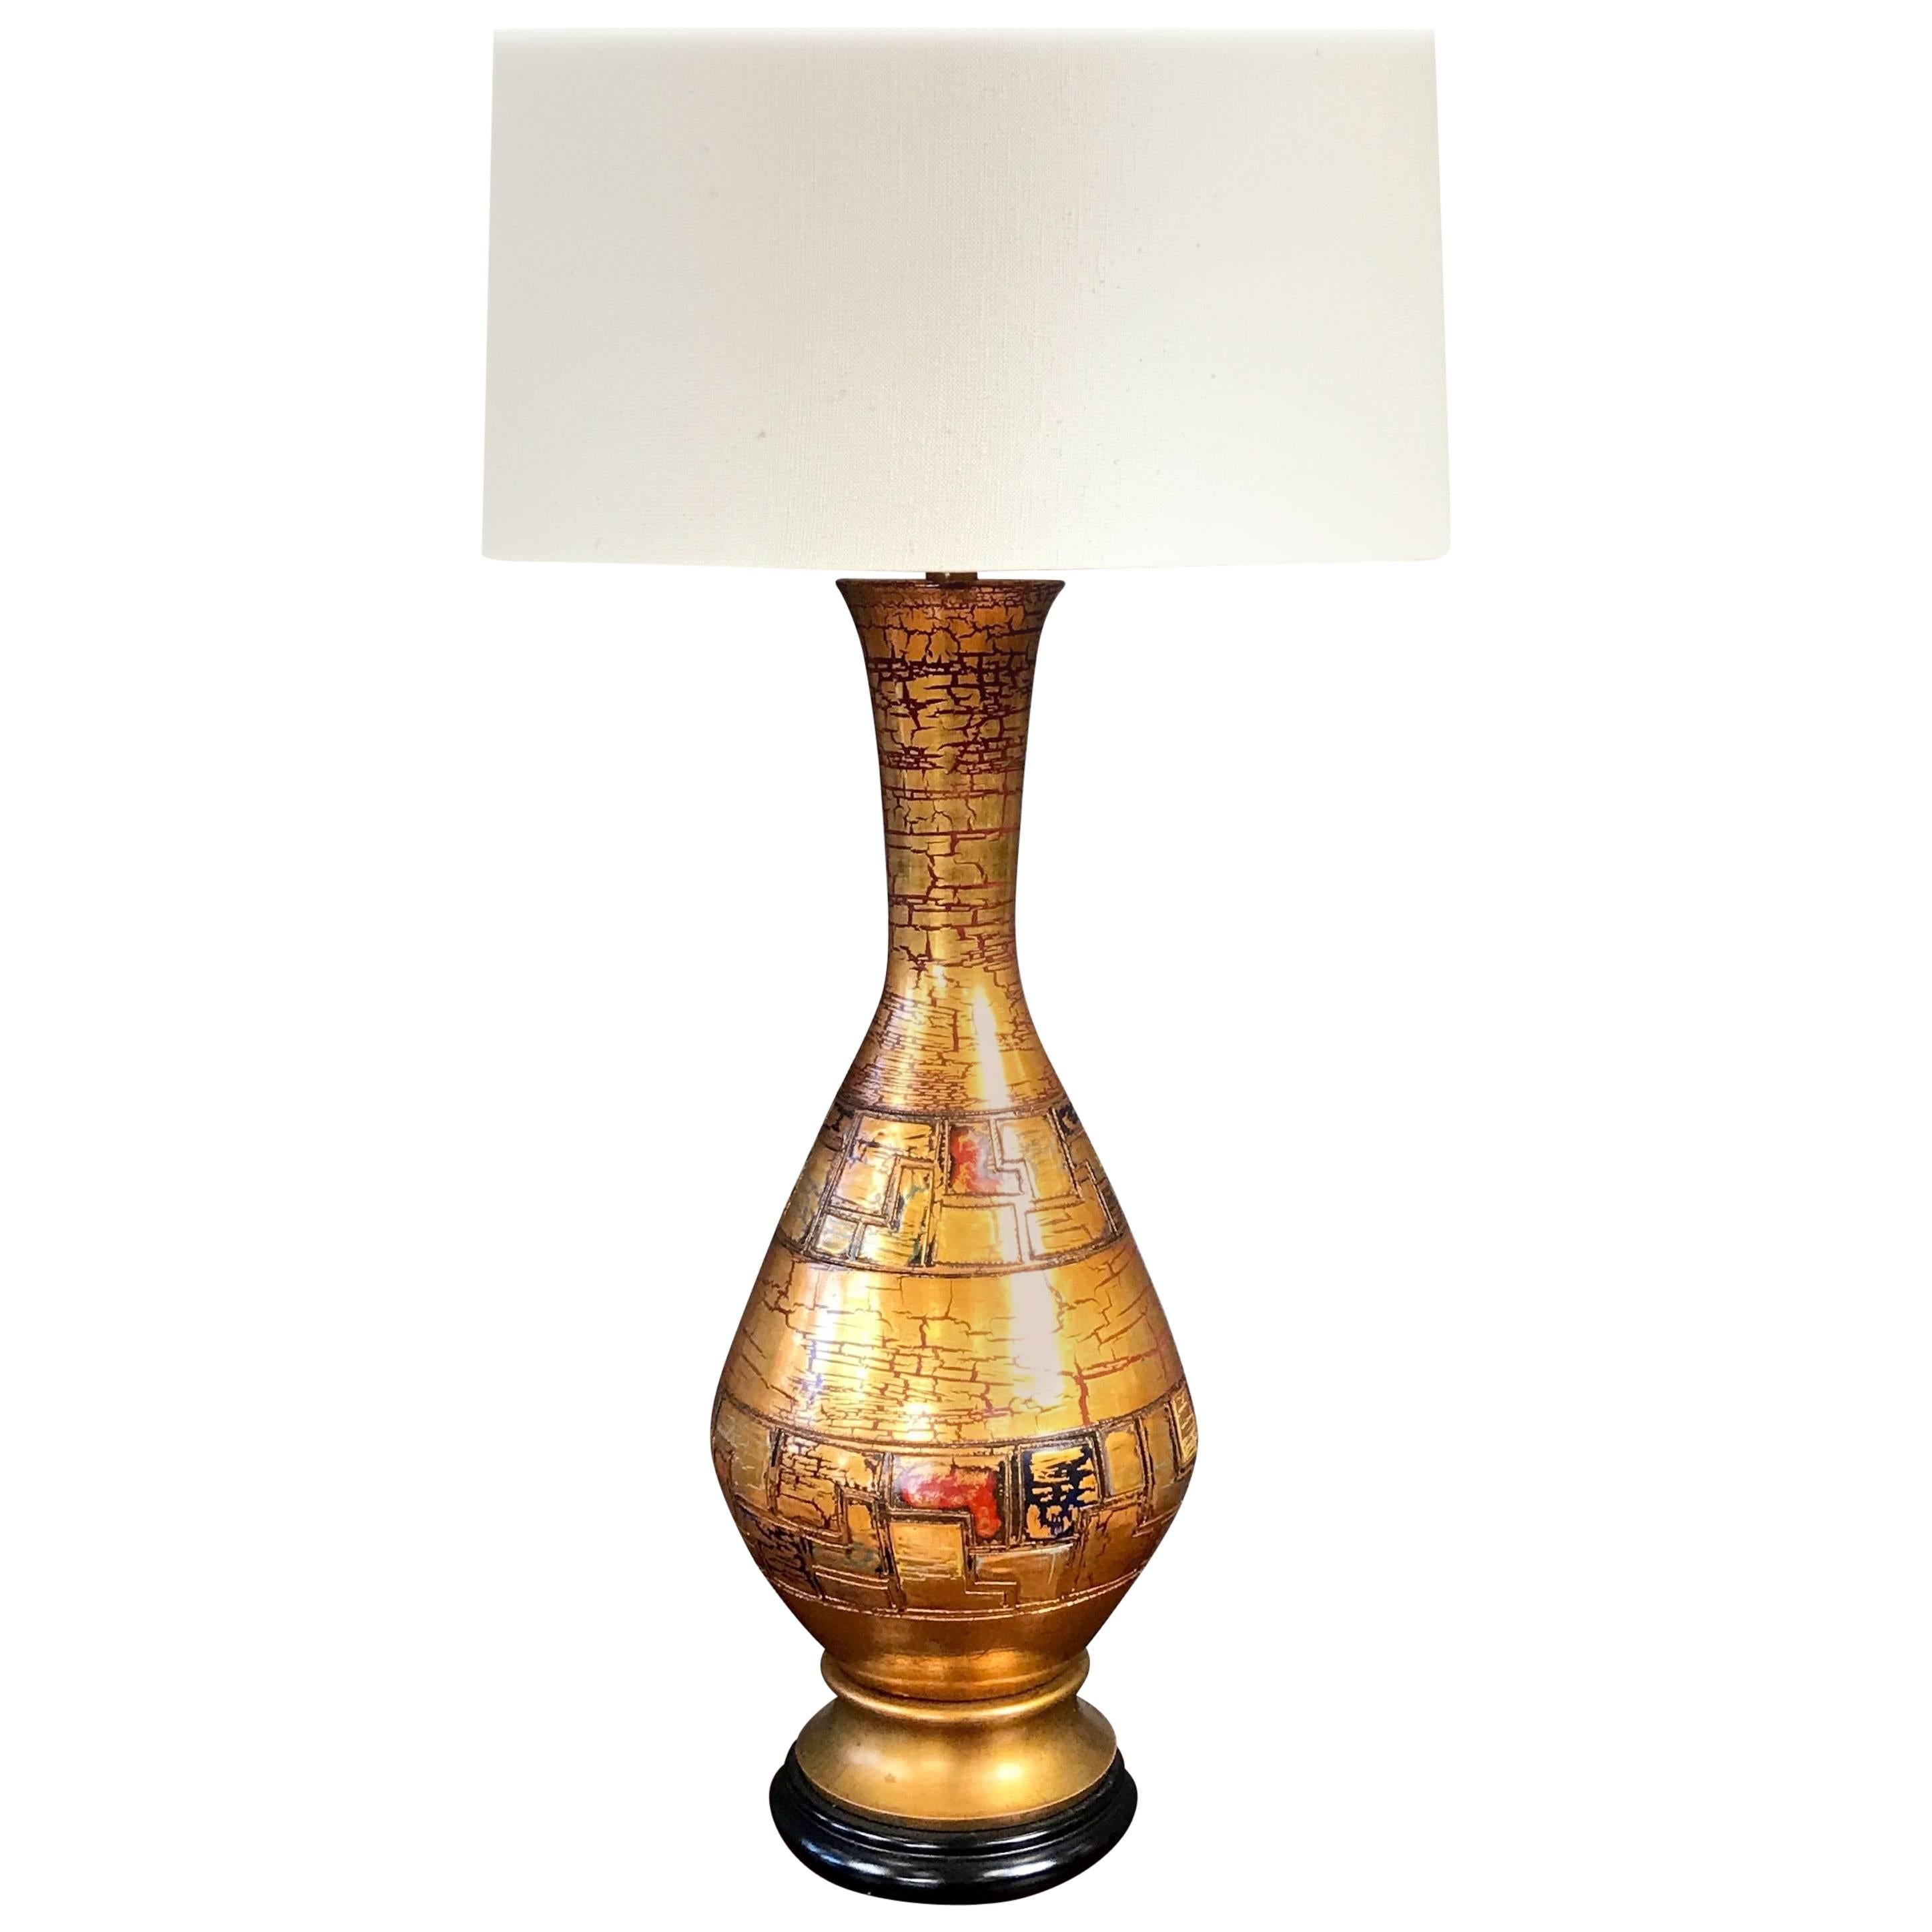 Monumental Marbro Ceramic Table Lamp with Gold Crackle Glaze